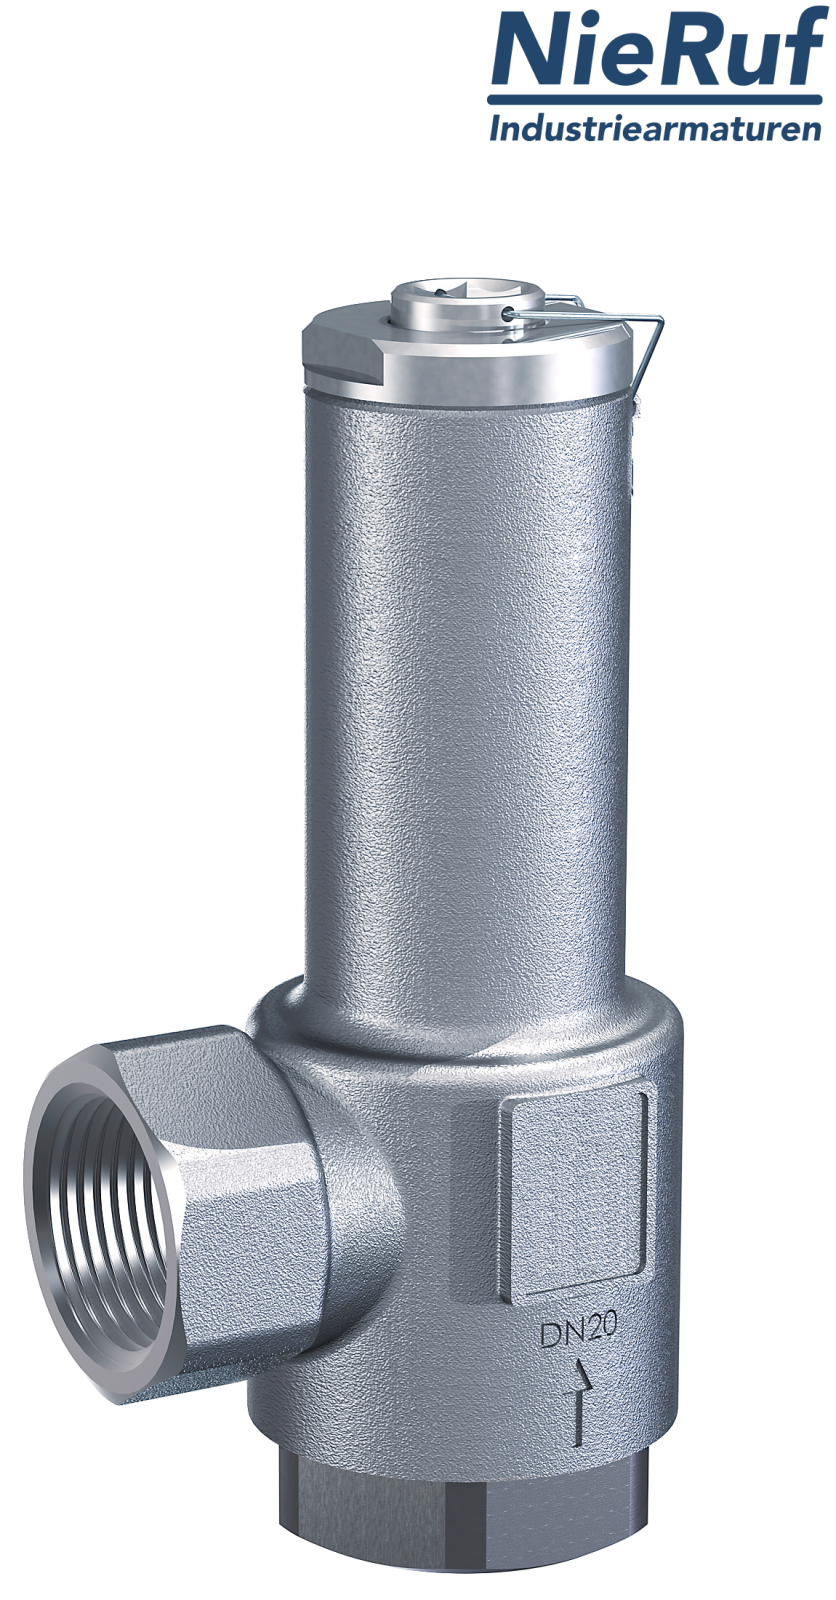 angle-type overflow valve 1 1/2" inch fm UV04 stainless steel AISI 316L 12 - 20 bar